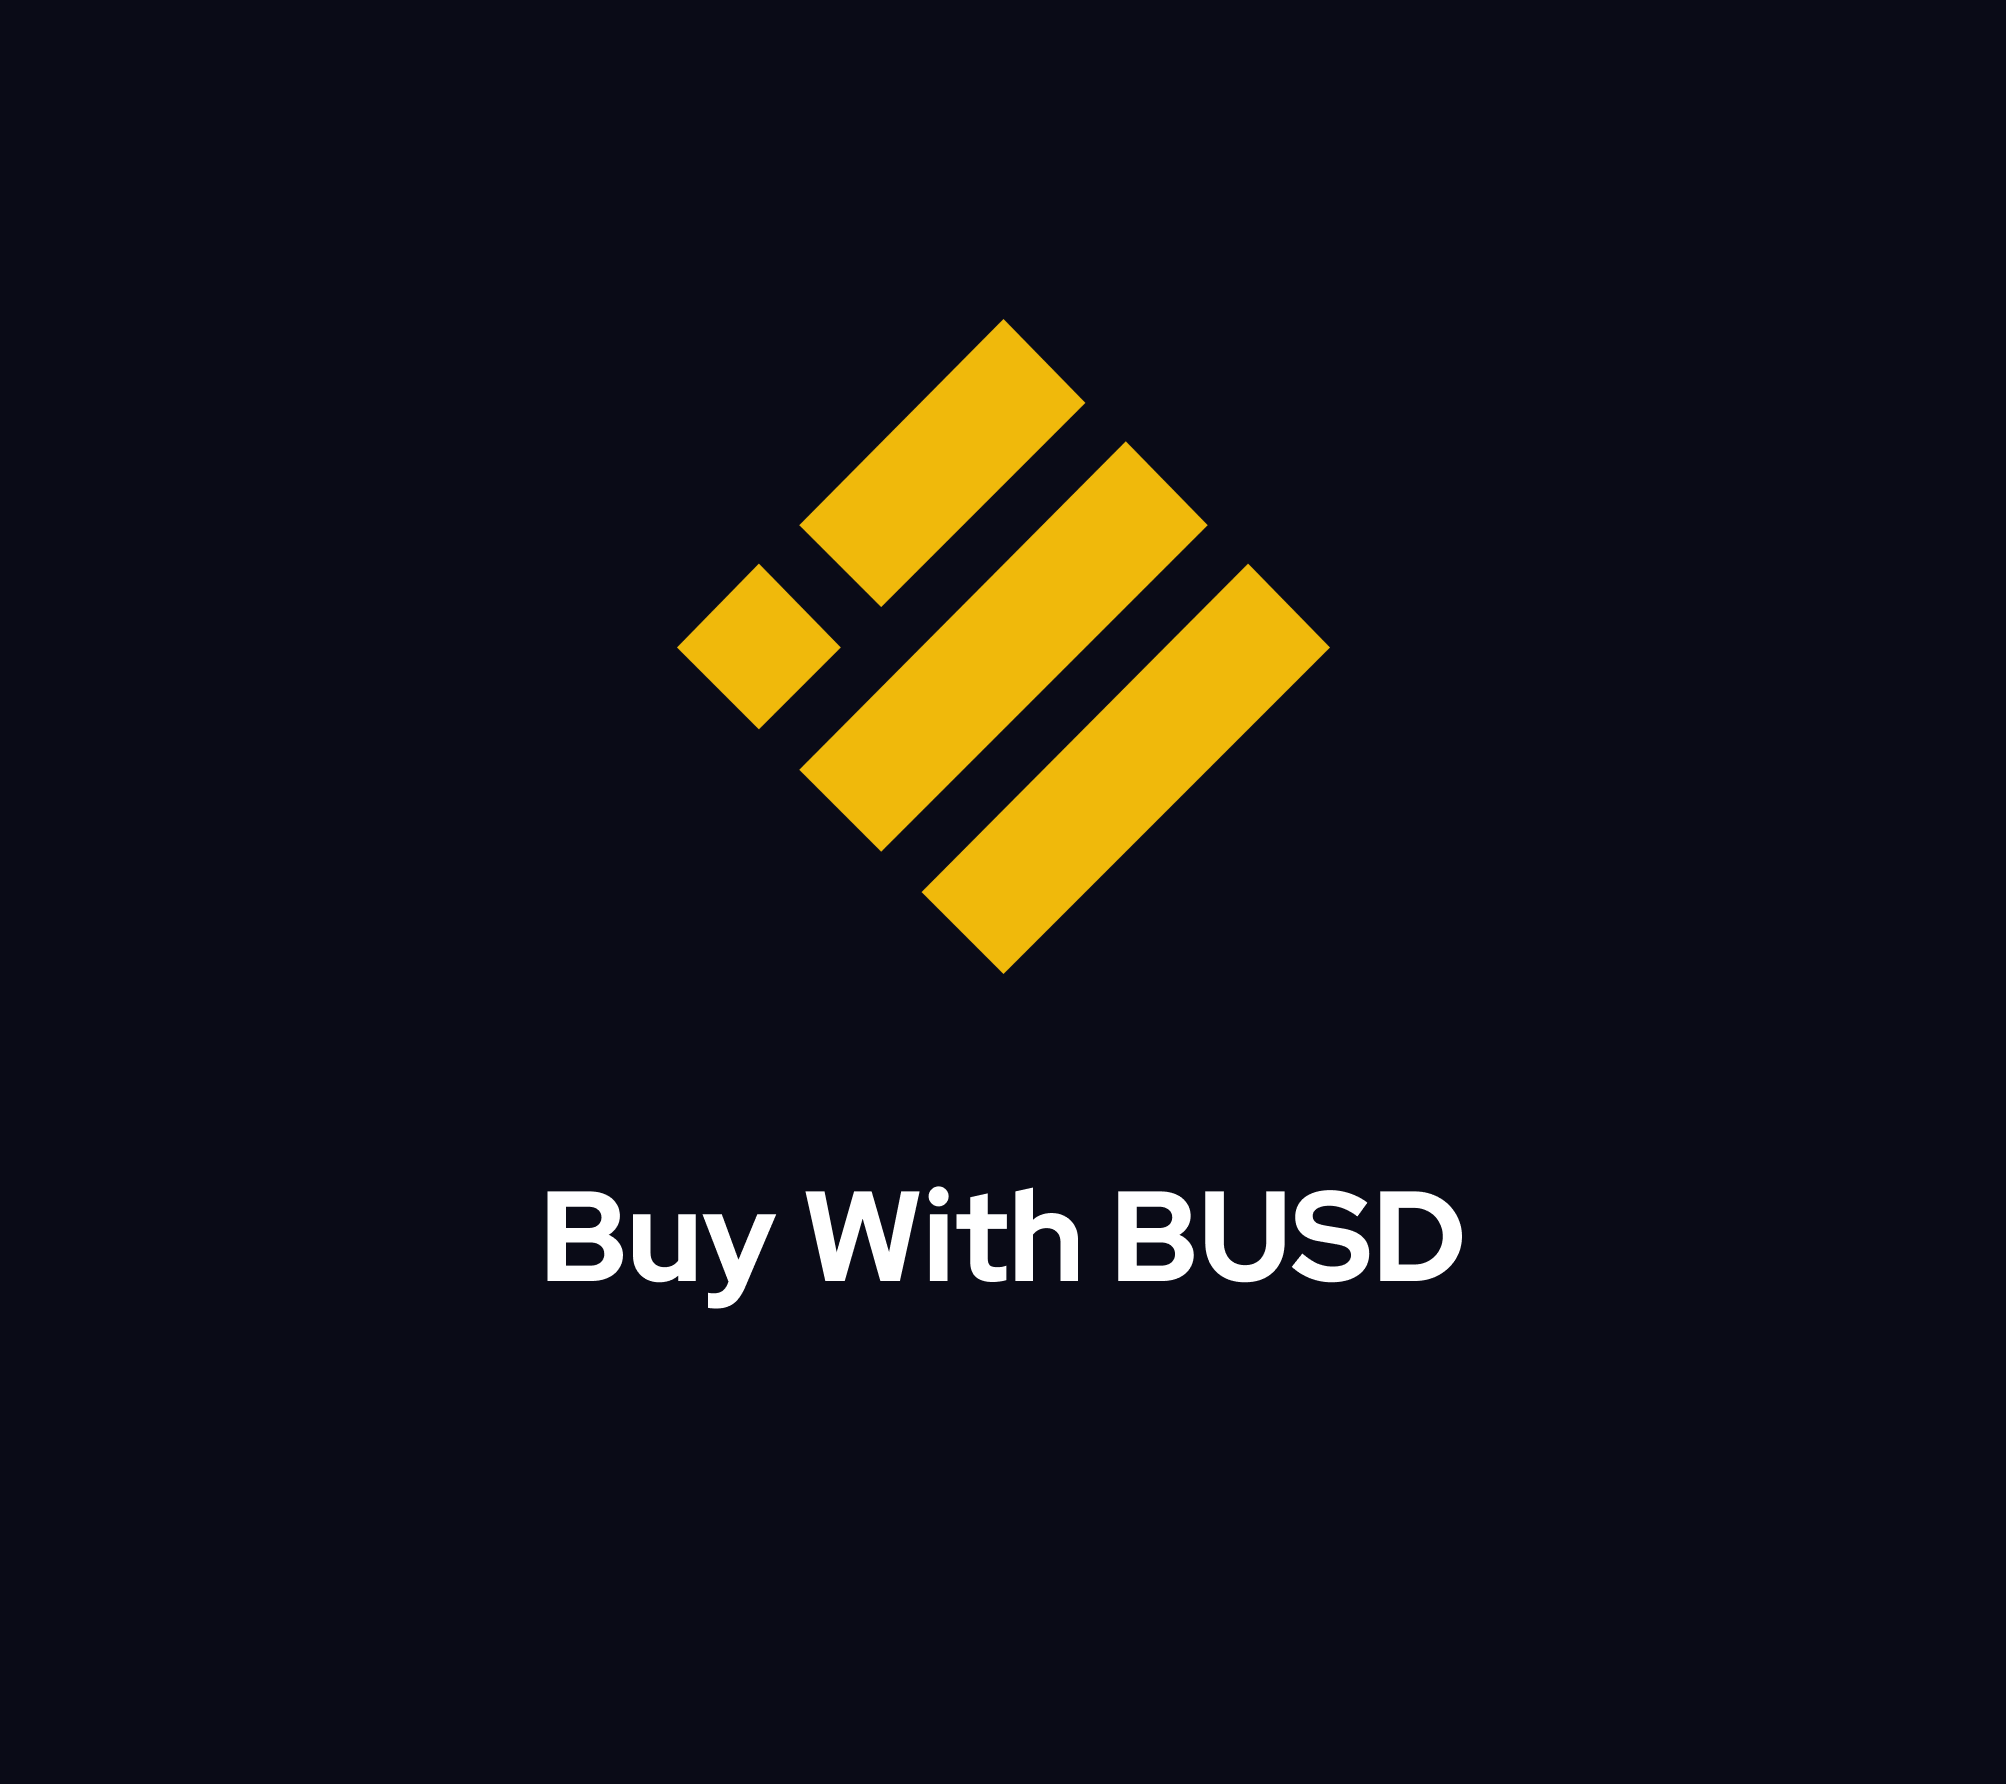 Buy with BUSD